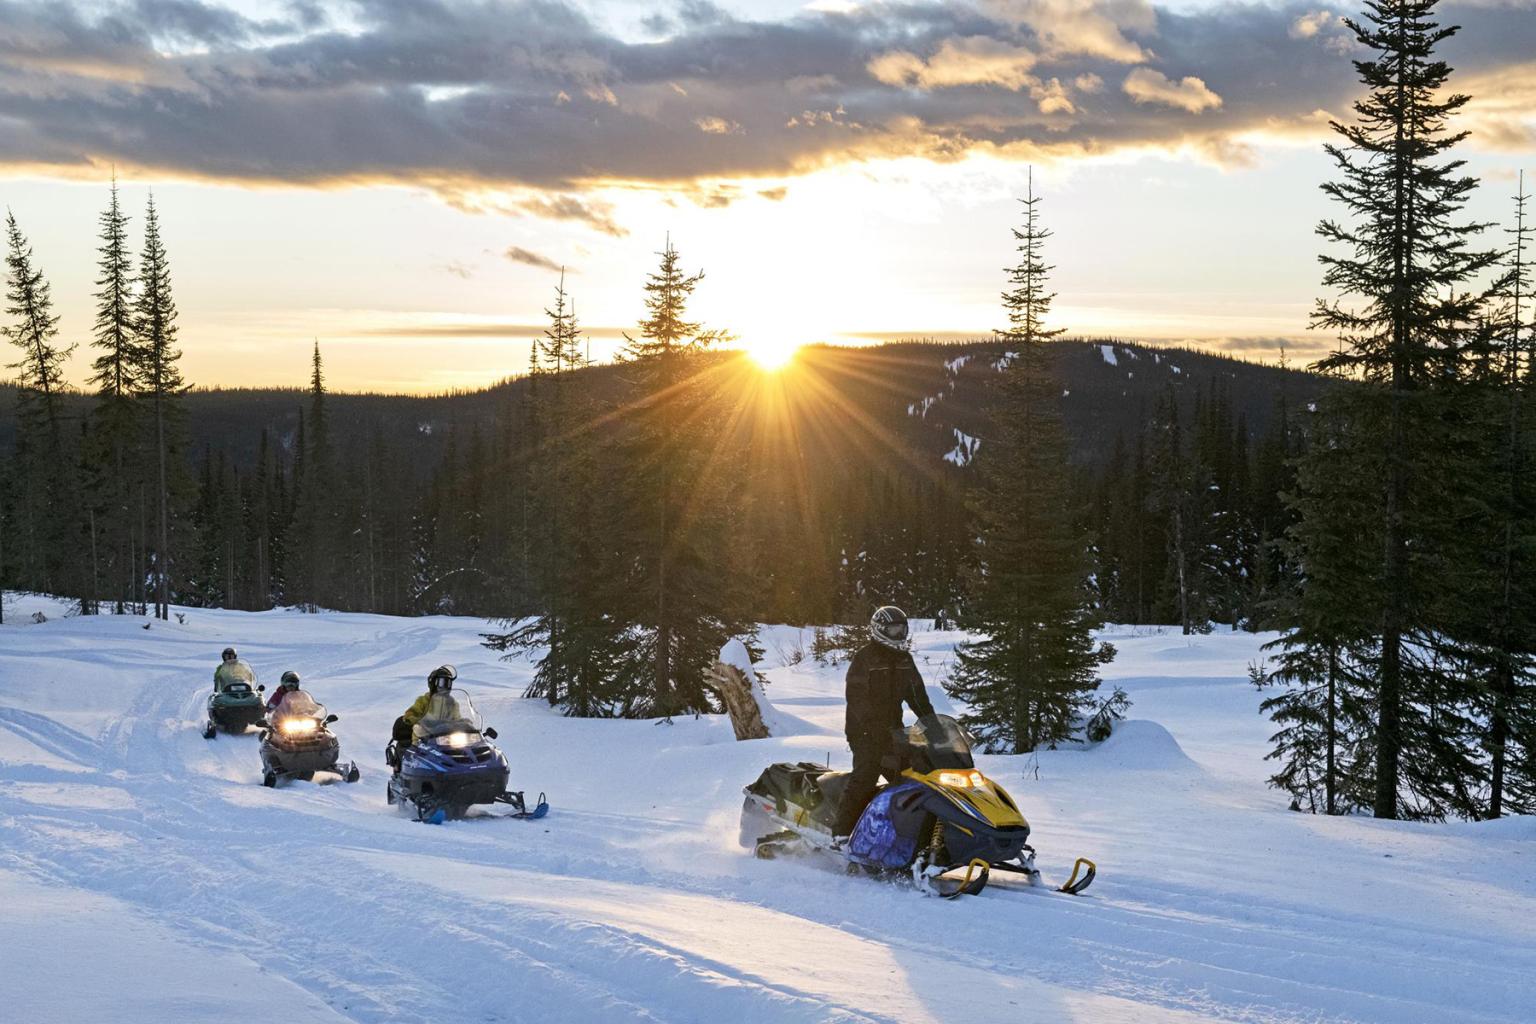 Snowmobiling in the Sun Peaks backcountry